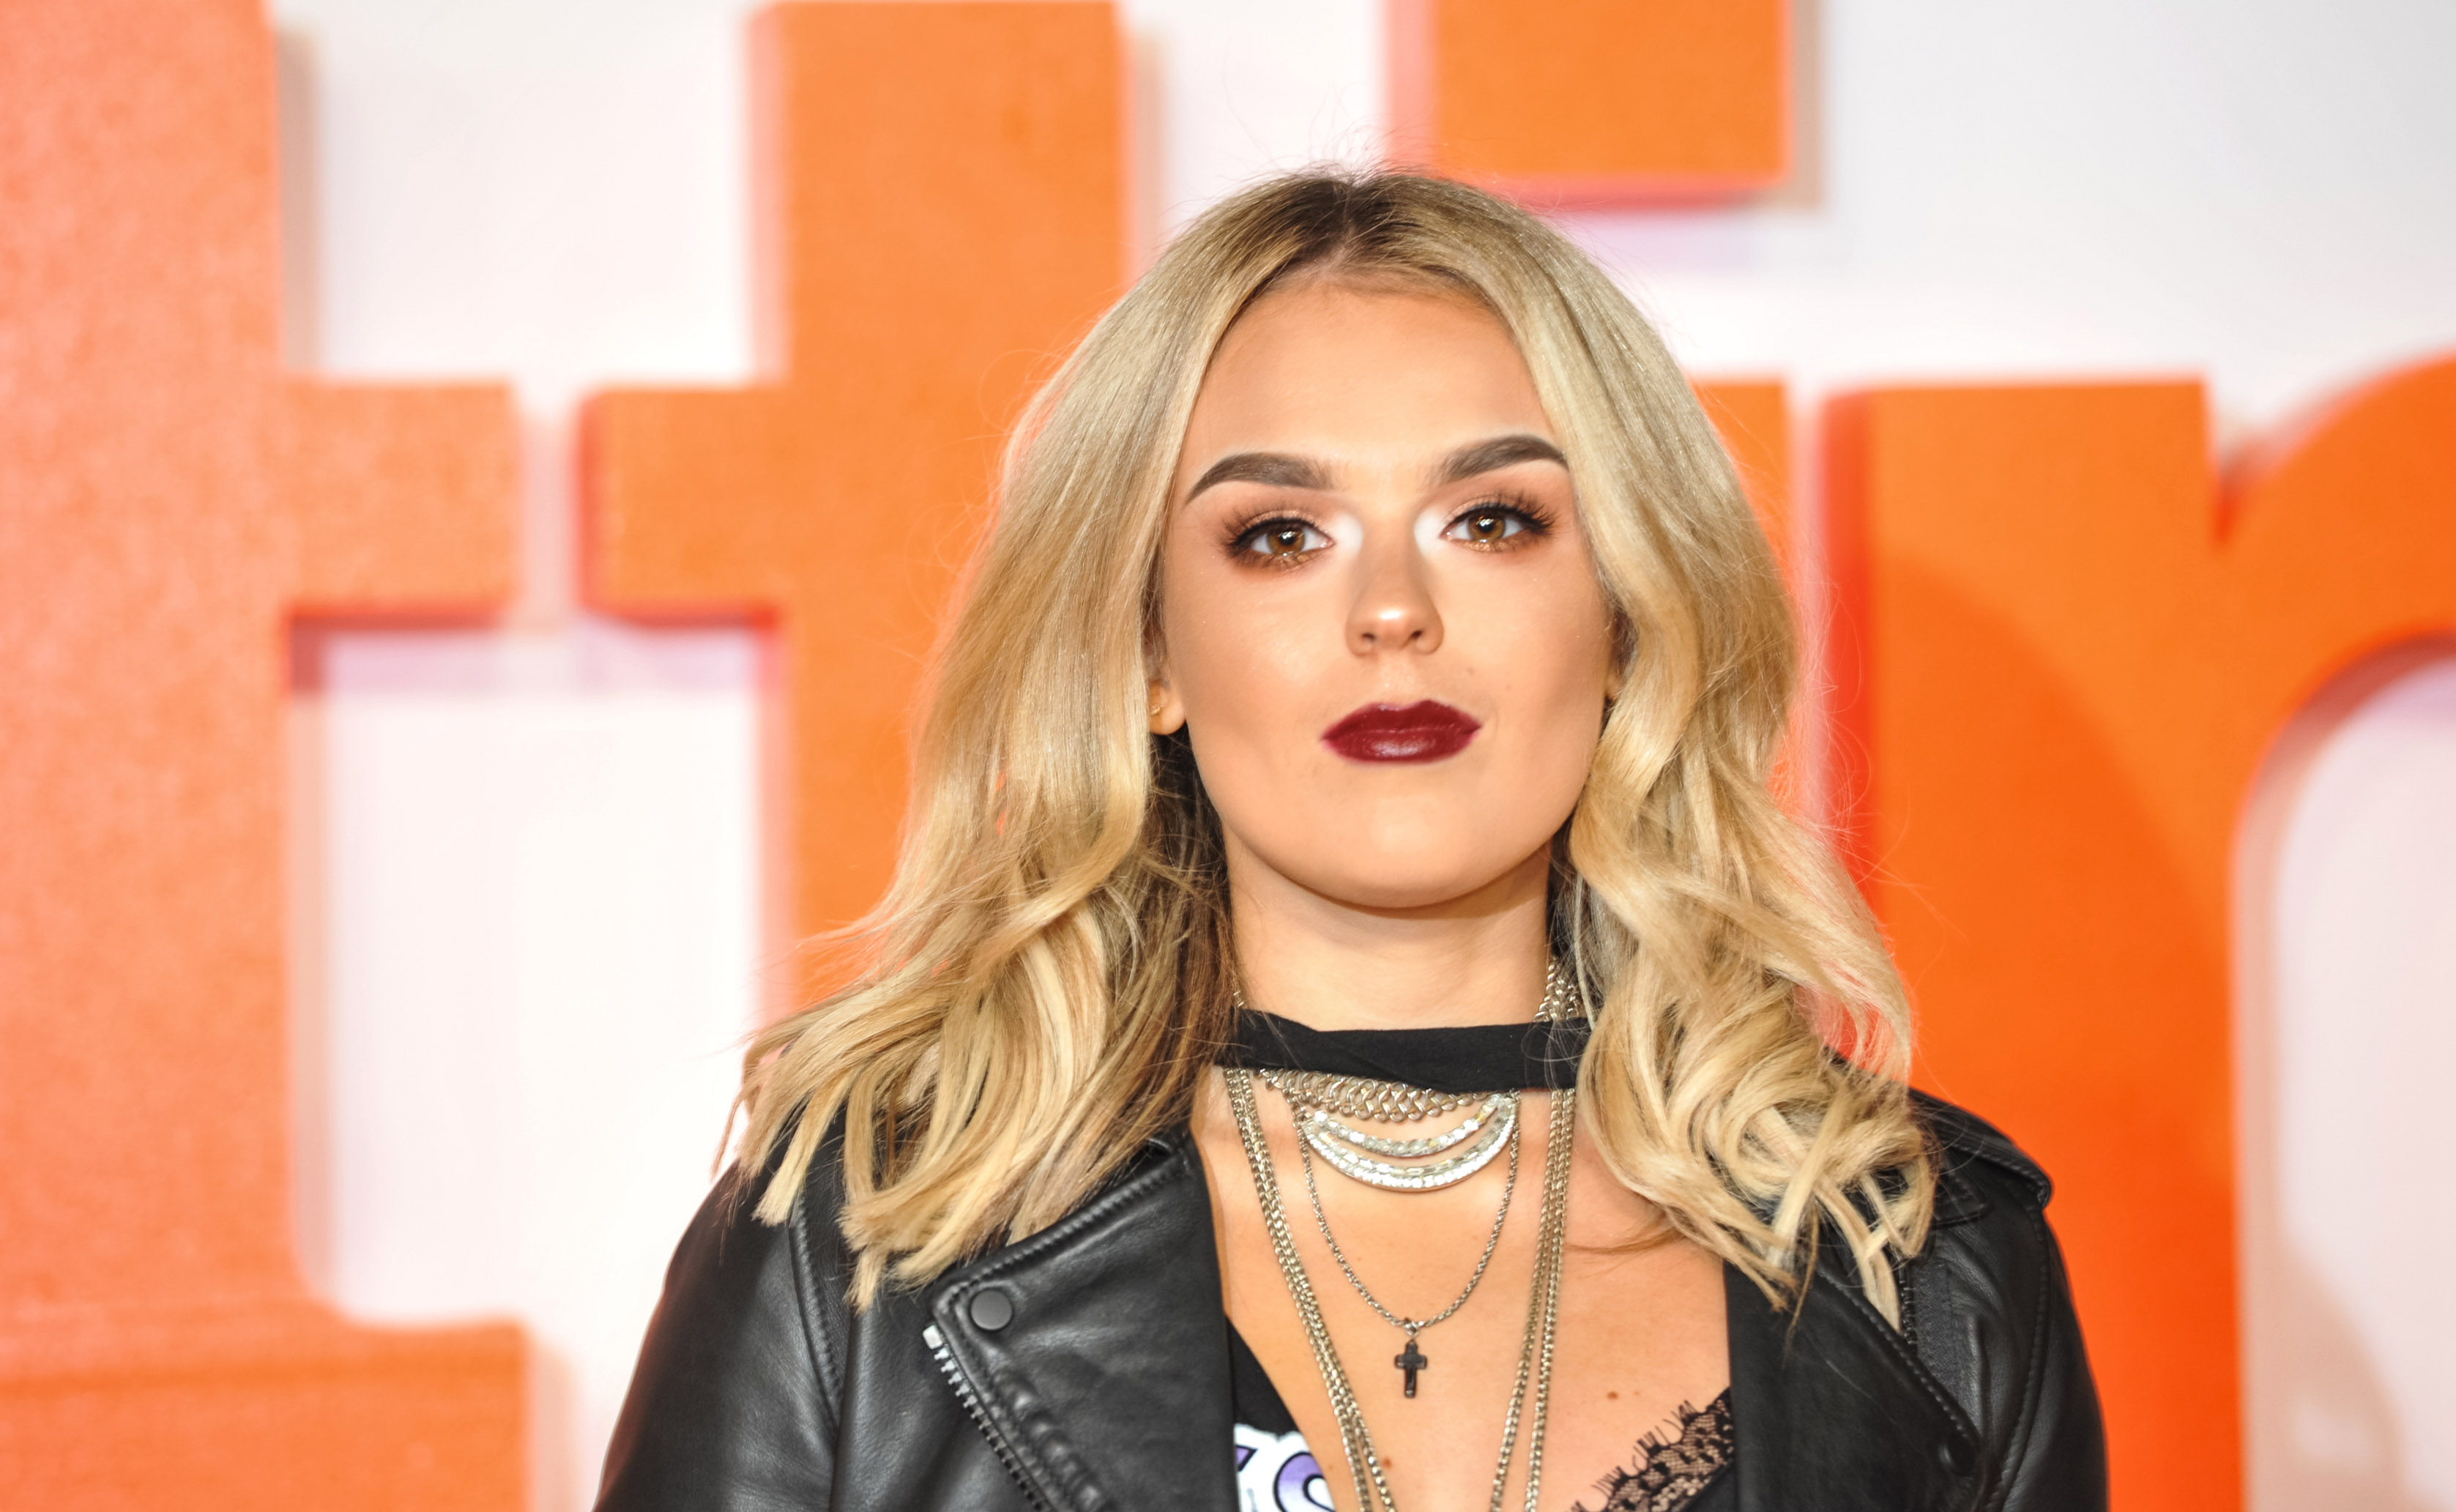 Tallia Storm attends the World Premiere of T2 Trainspotting